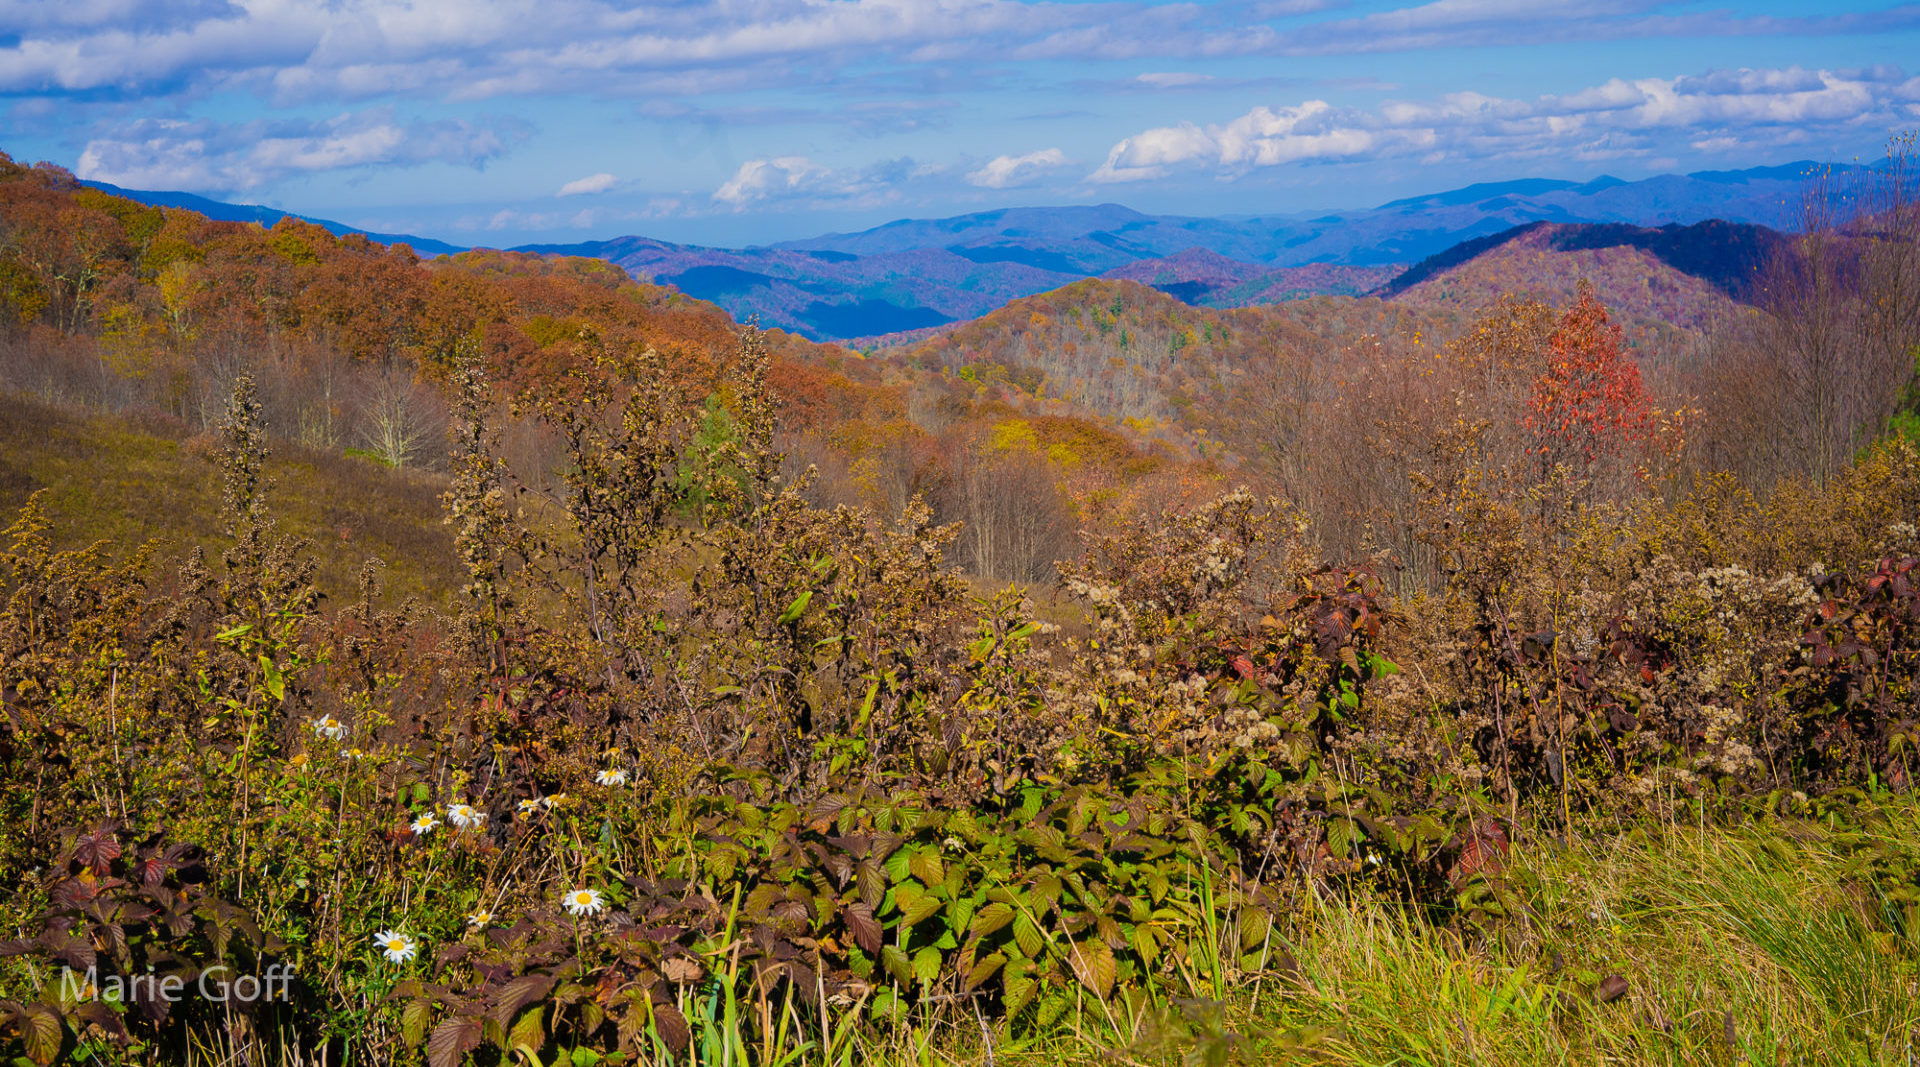 Why Purchase Knob Trail Offers the Best Day Hiking Adventure